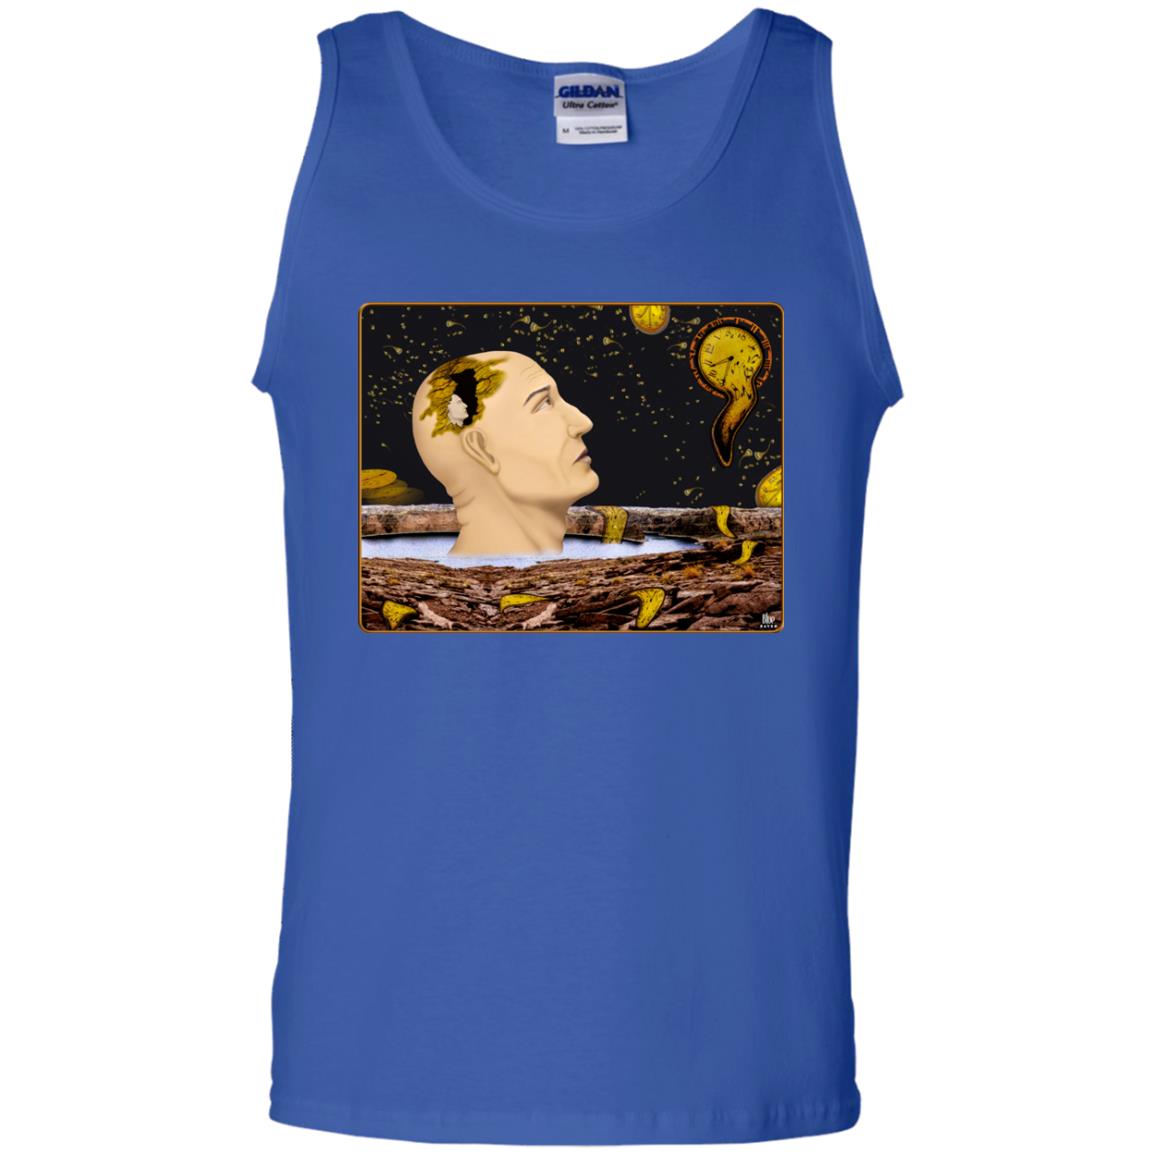 EARTH TIME RUNNING OUT - Men's Tank Top